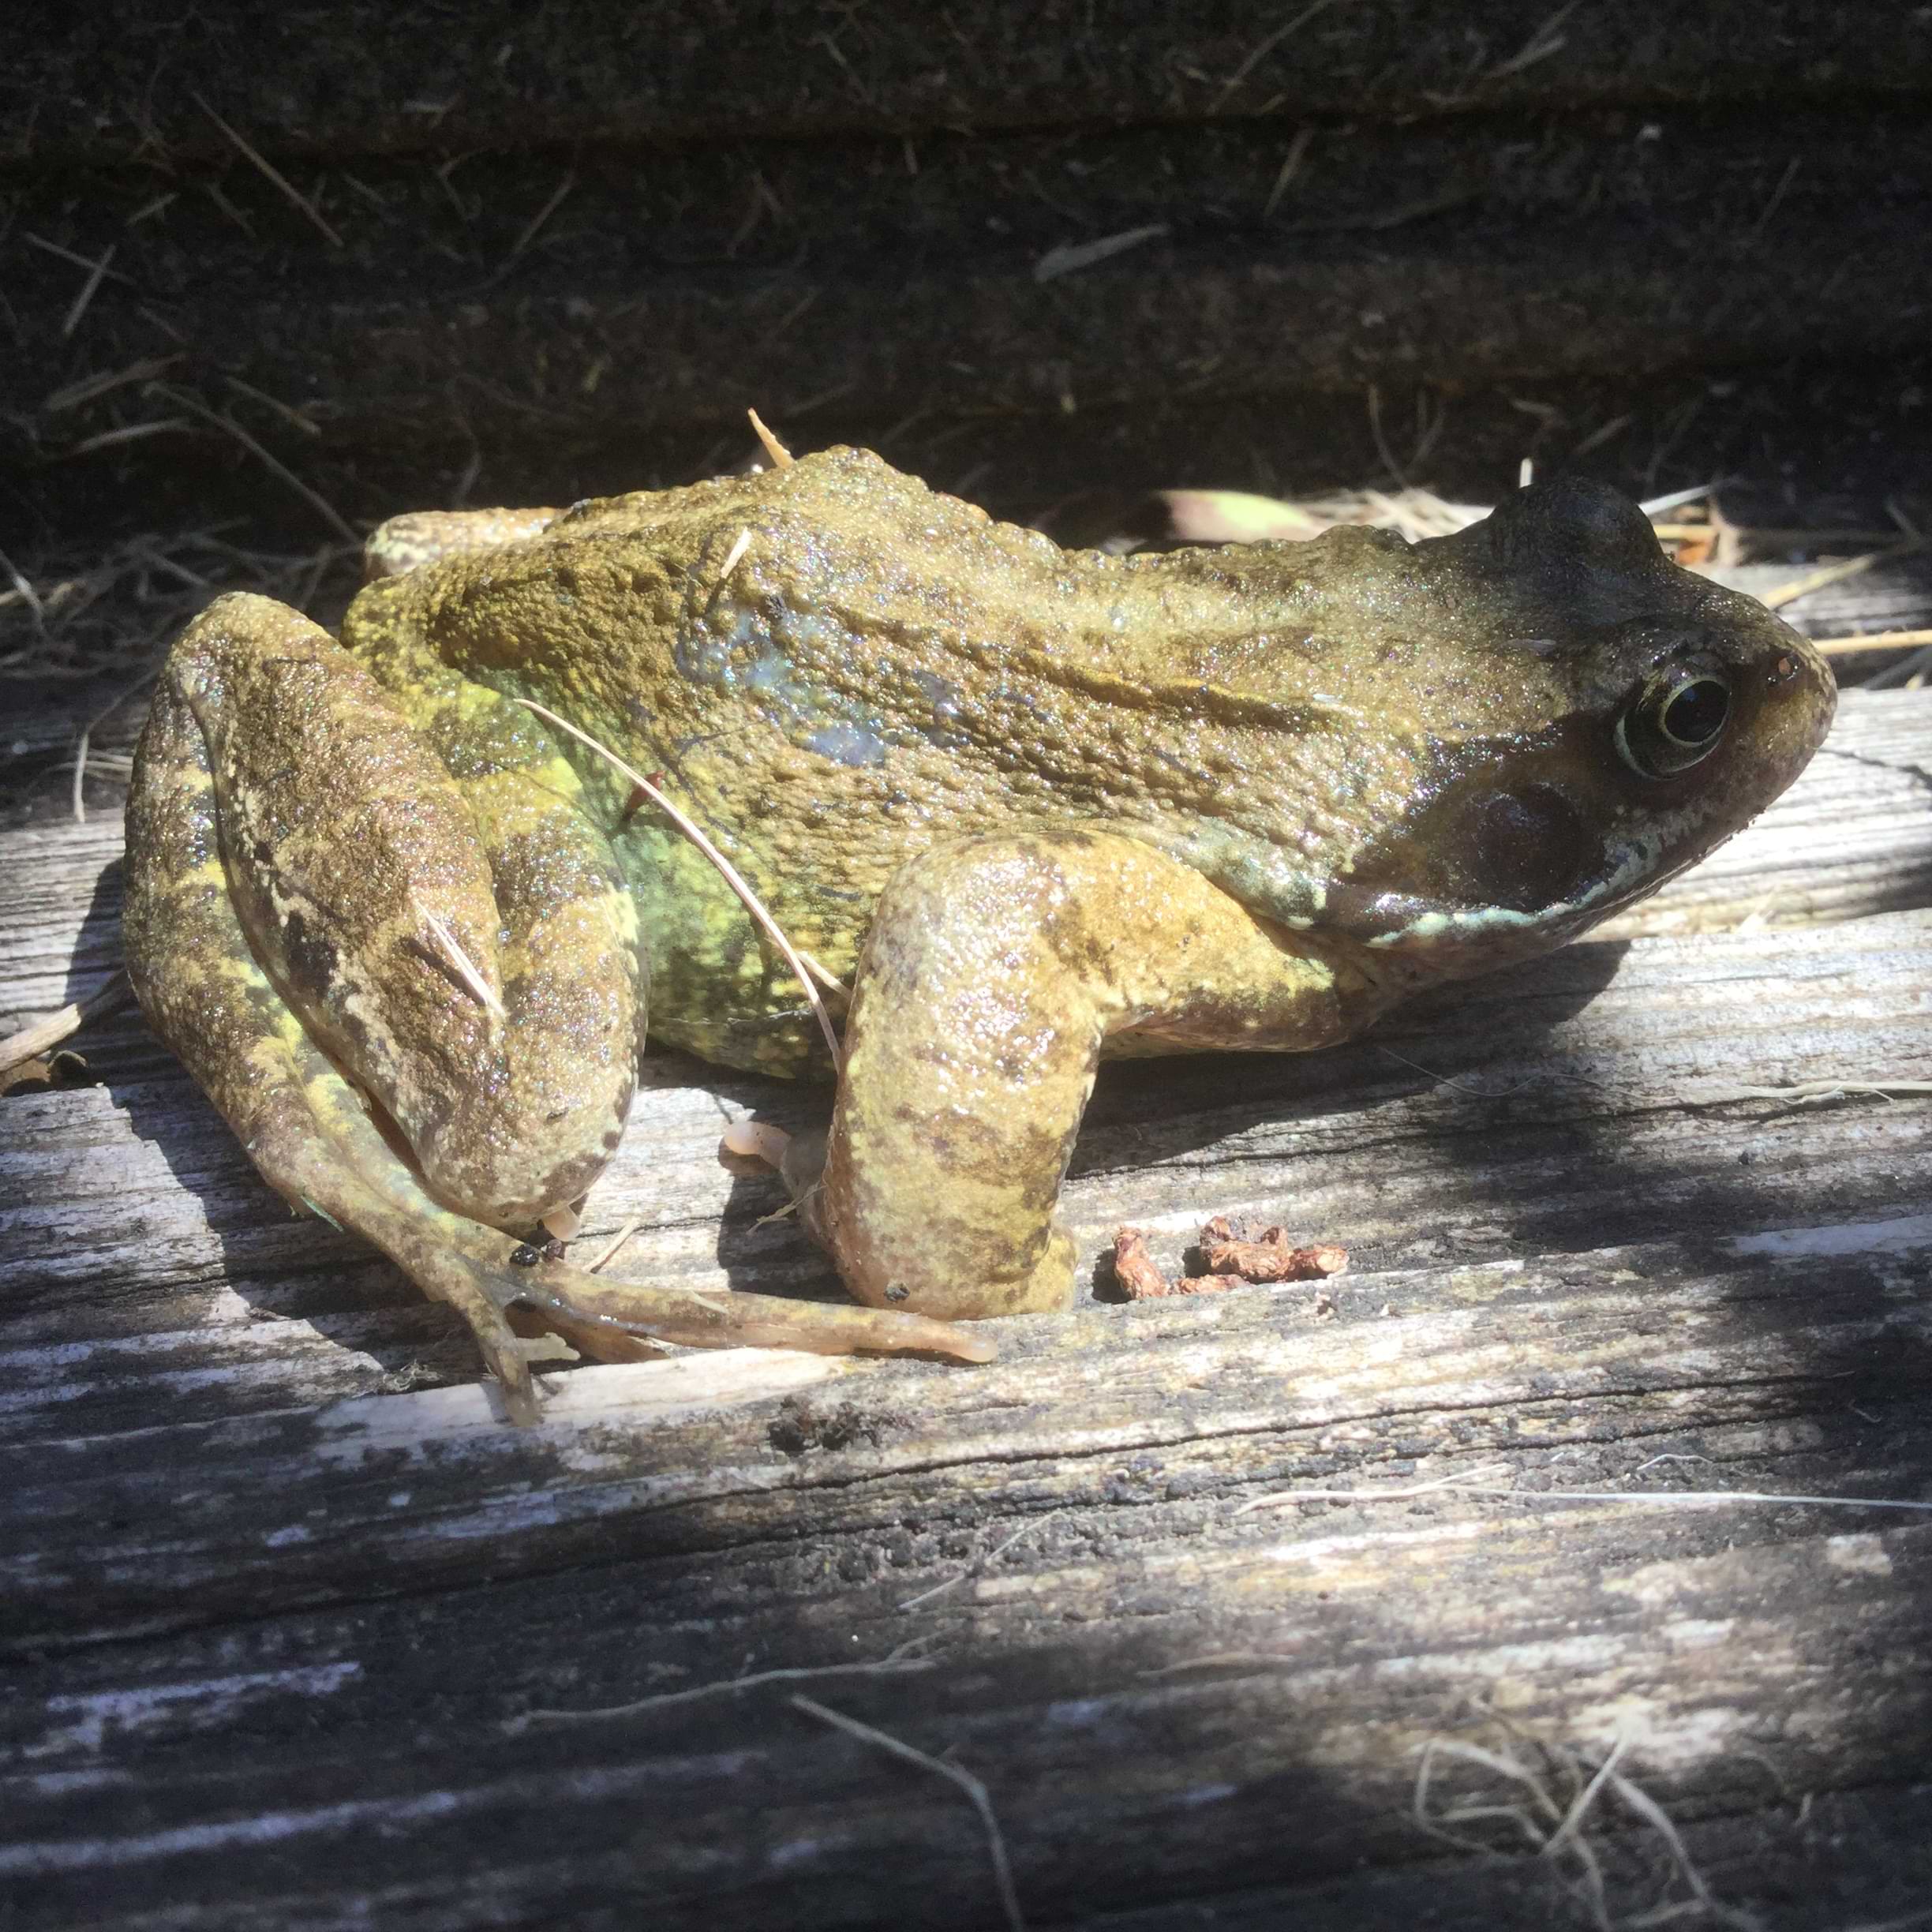 Photo of the same frog from a different angle. The sun had come out when I took this photo so most of her body is sitting in direct sunlight with some shadows covering her head and eyes. A few small, translucent grey patches of skin can be seen on her back.